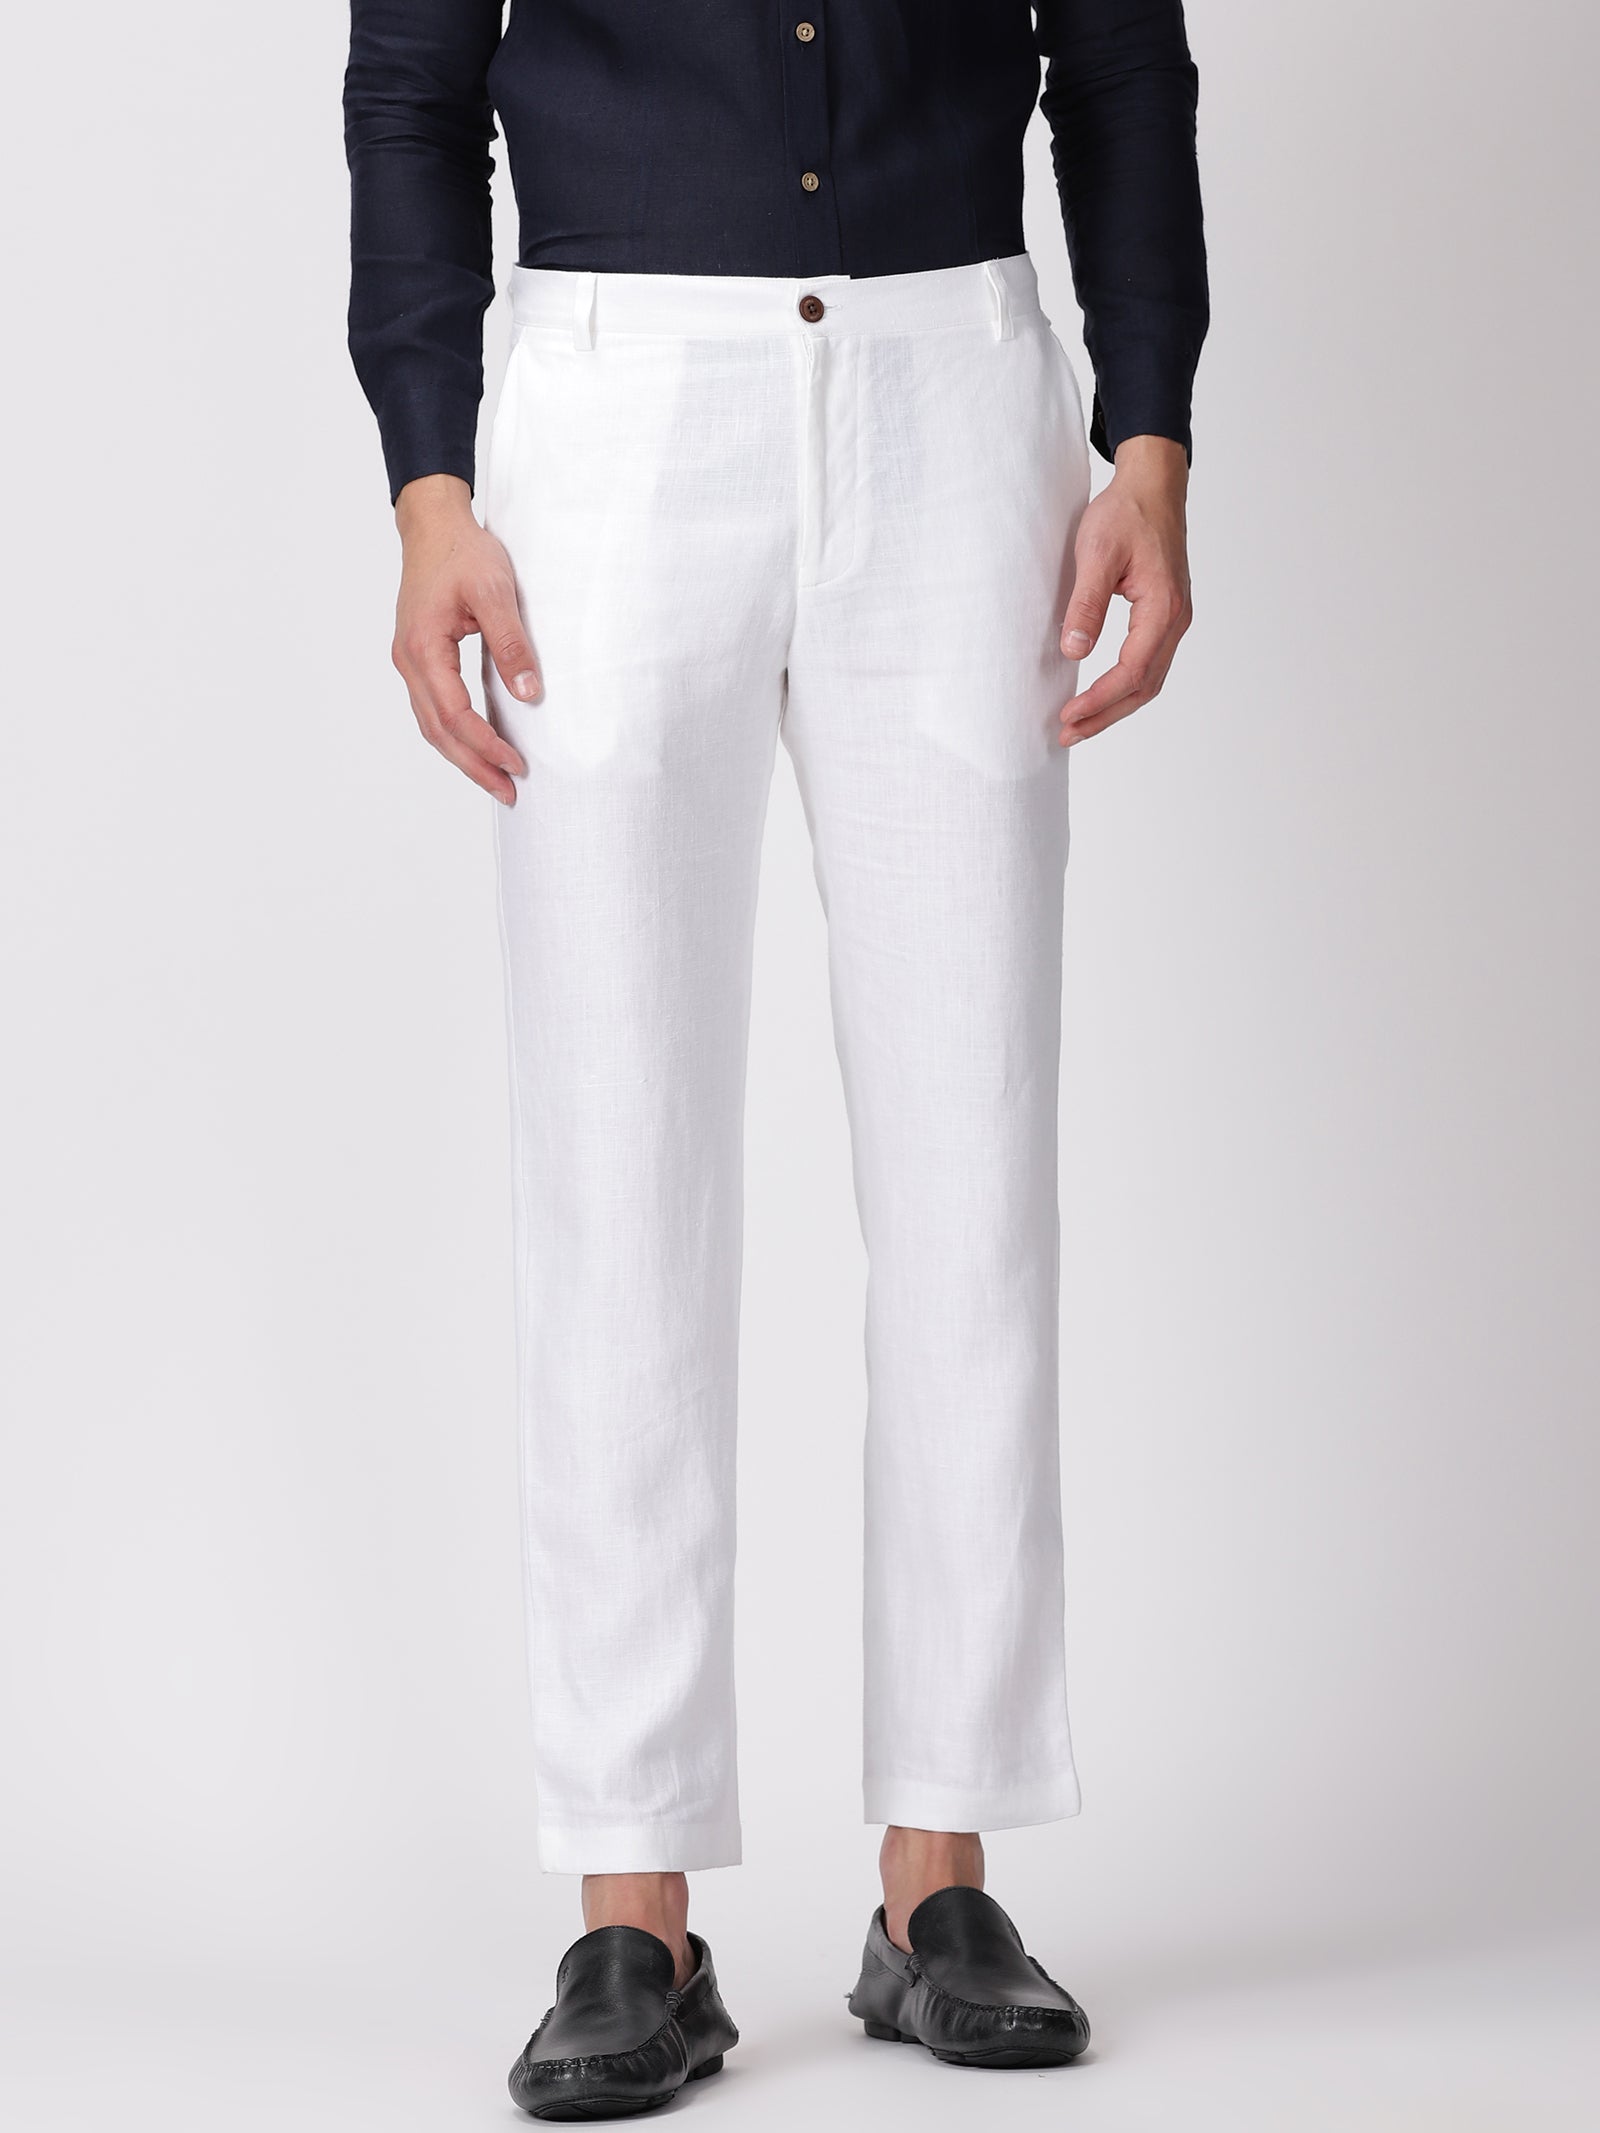 White linen pants outfit, White linen outfit, White outfit for men